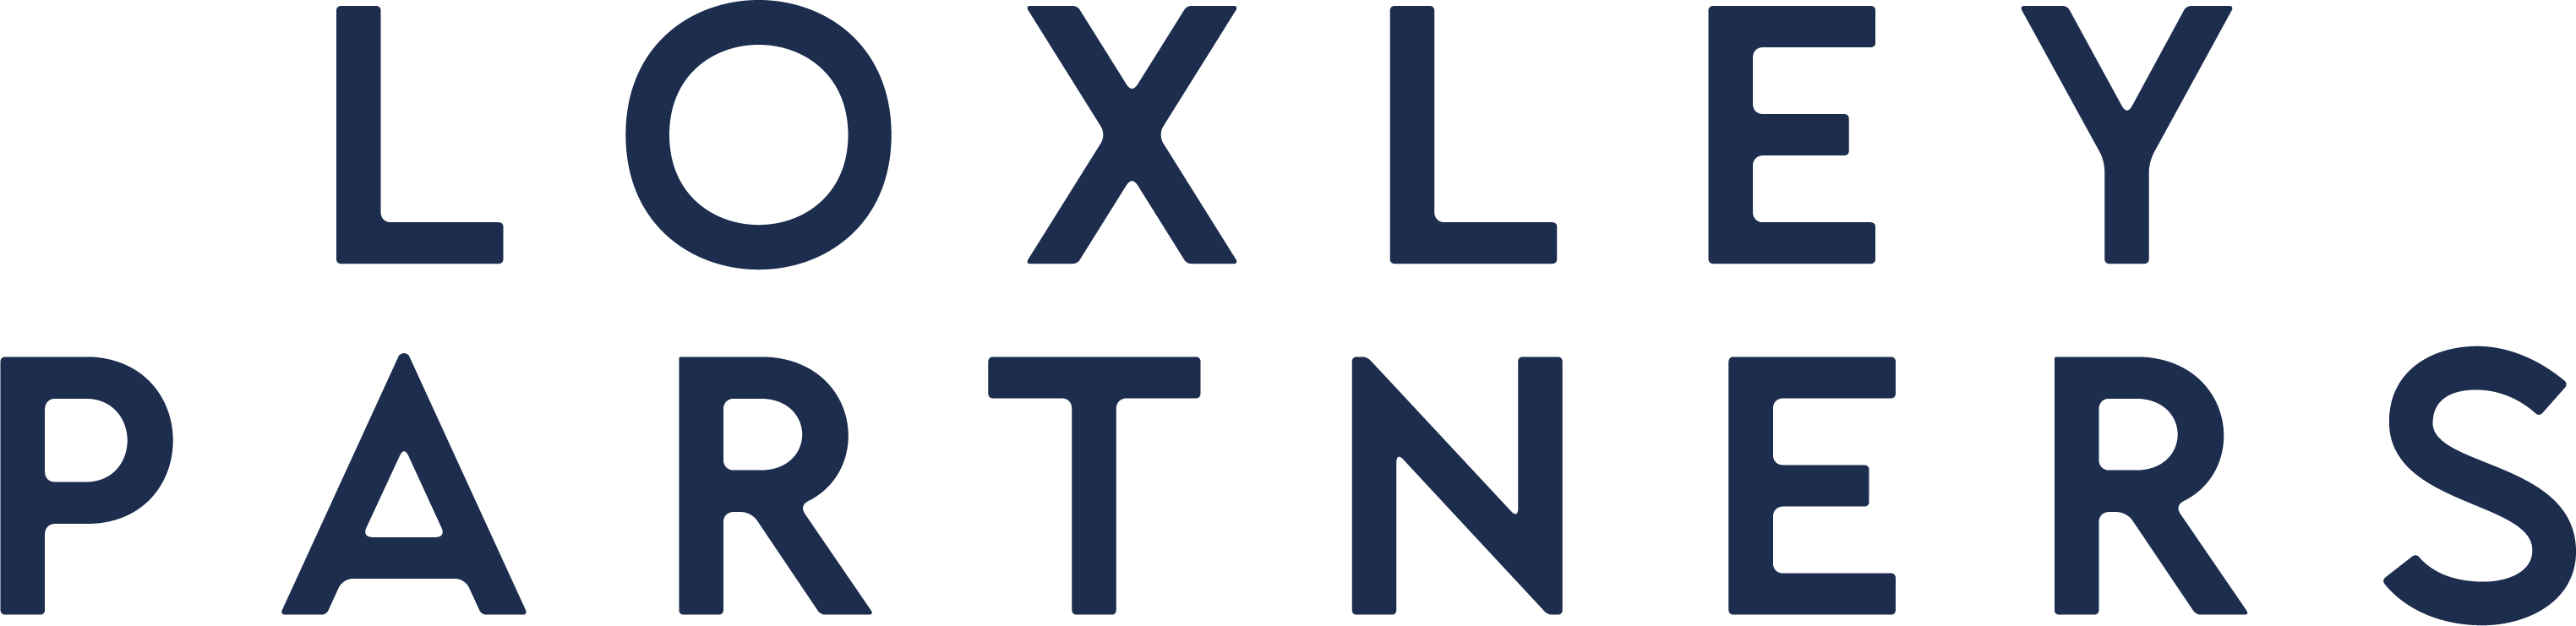 Loxley-Partners Logo